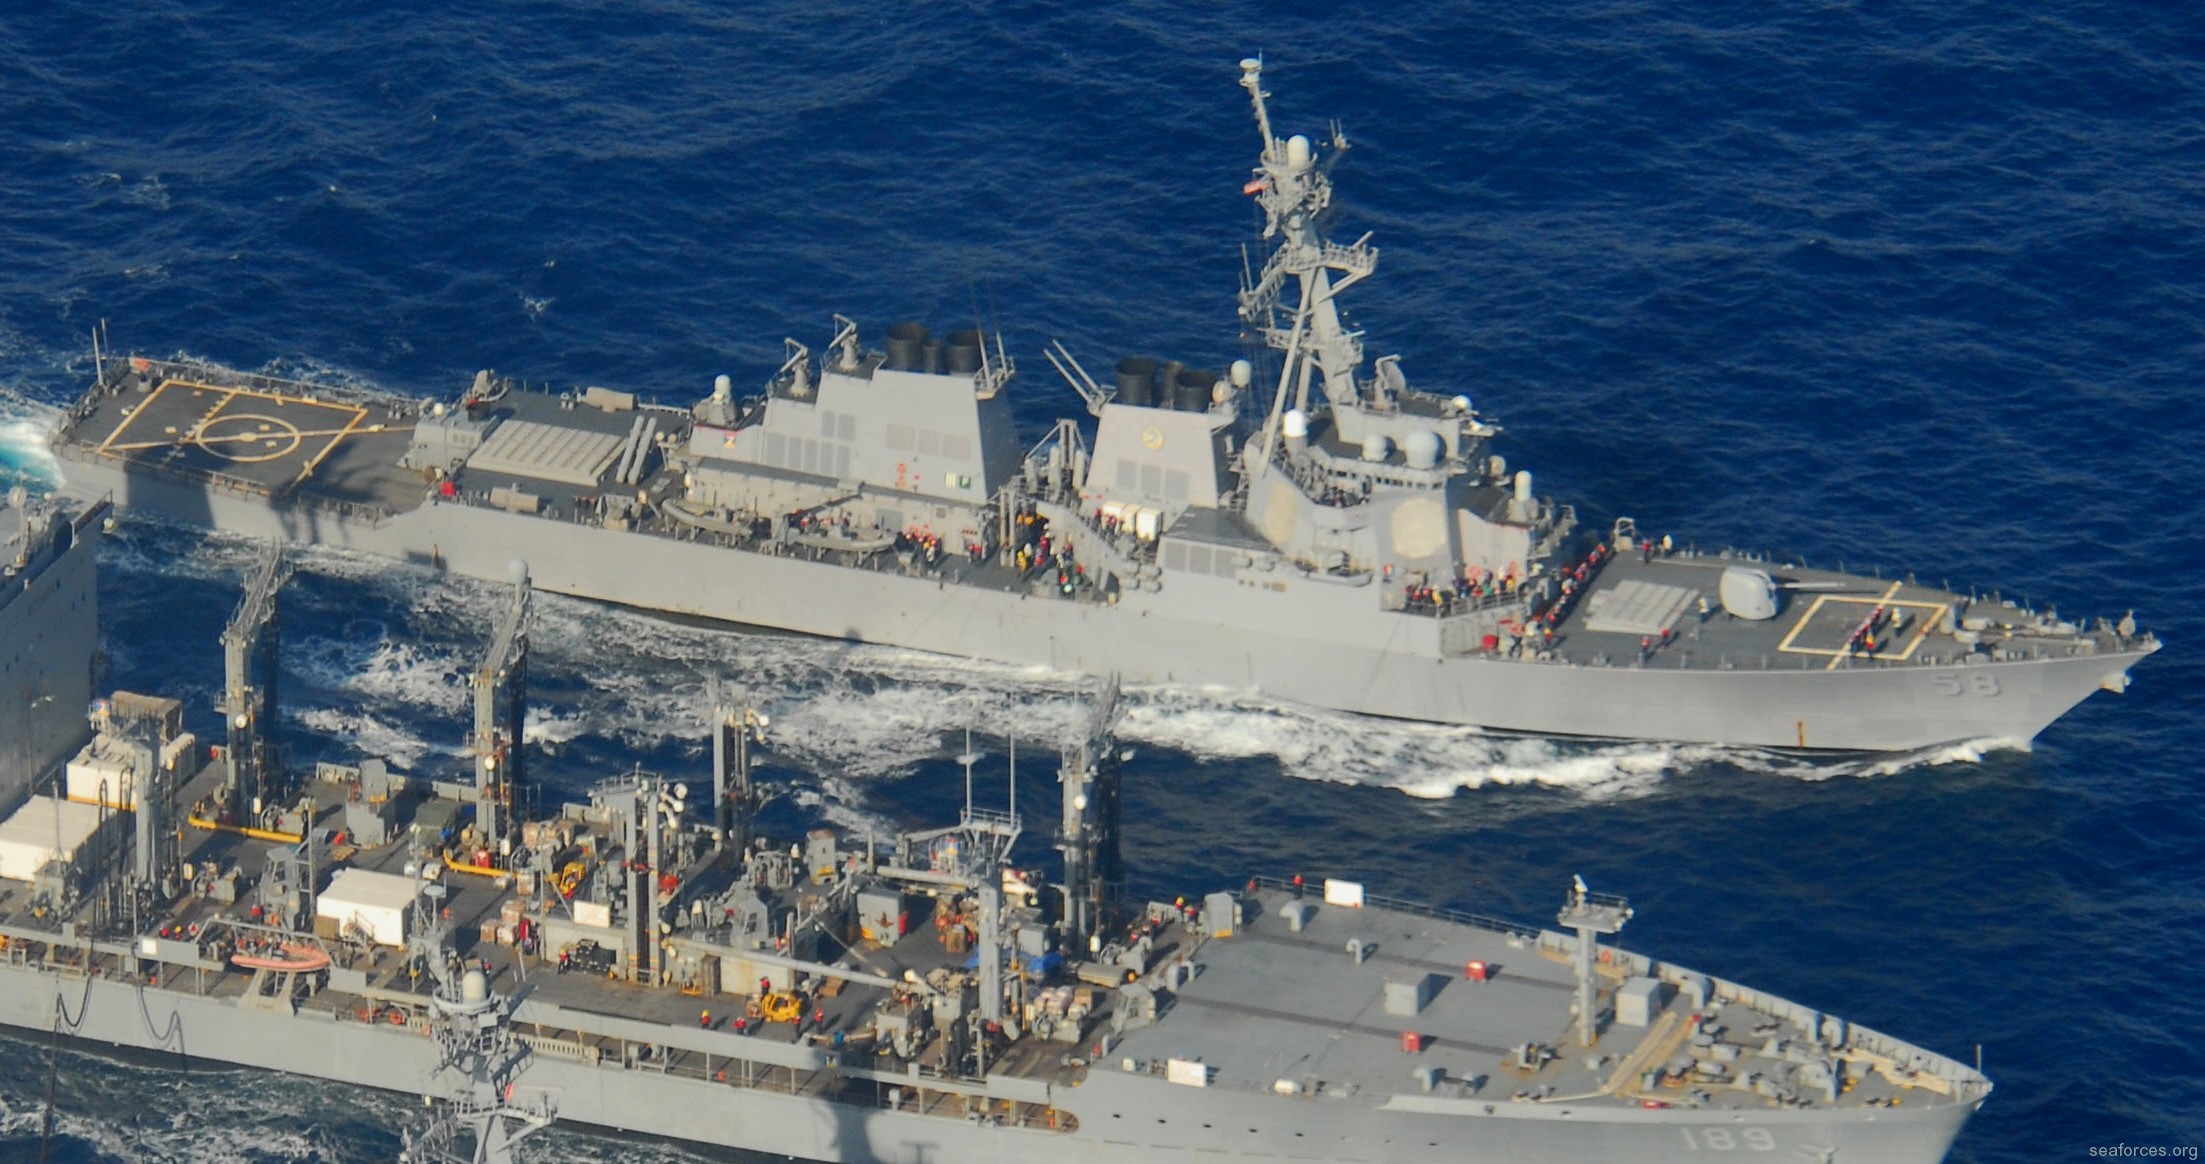 ddg-58 uss laboon guided missile destroyer us navy 46